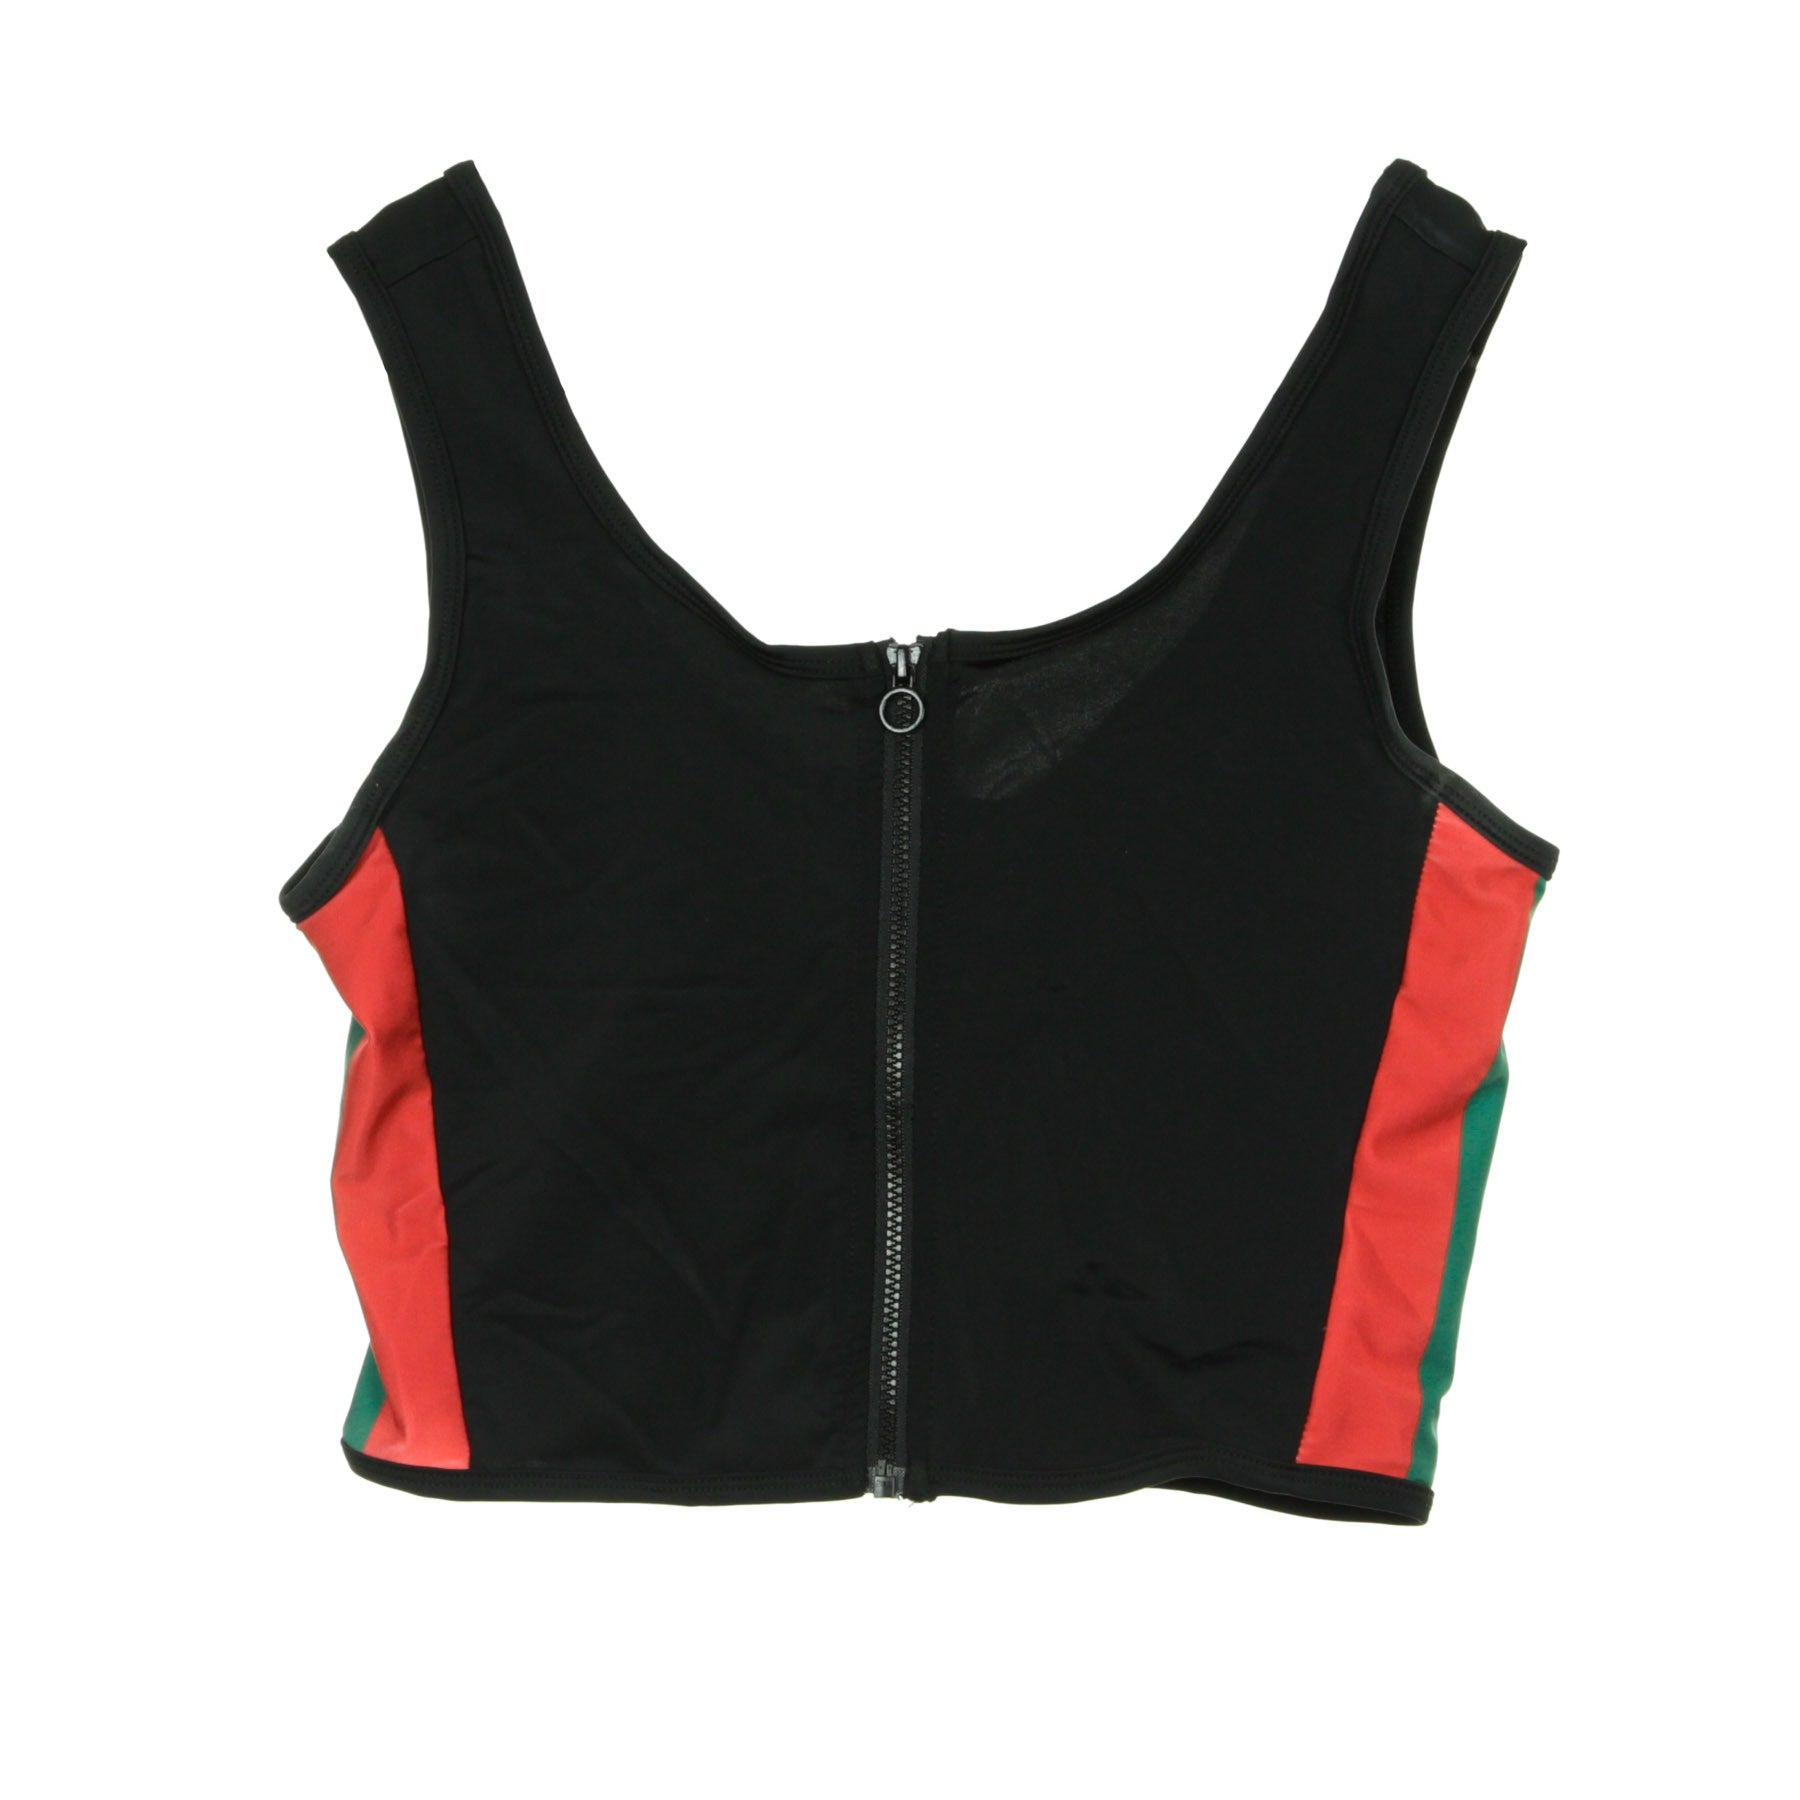 Top Donna Side Stripe Cropped Zip Top Black/fire Red/green